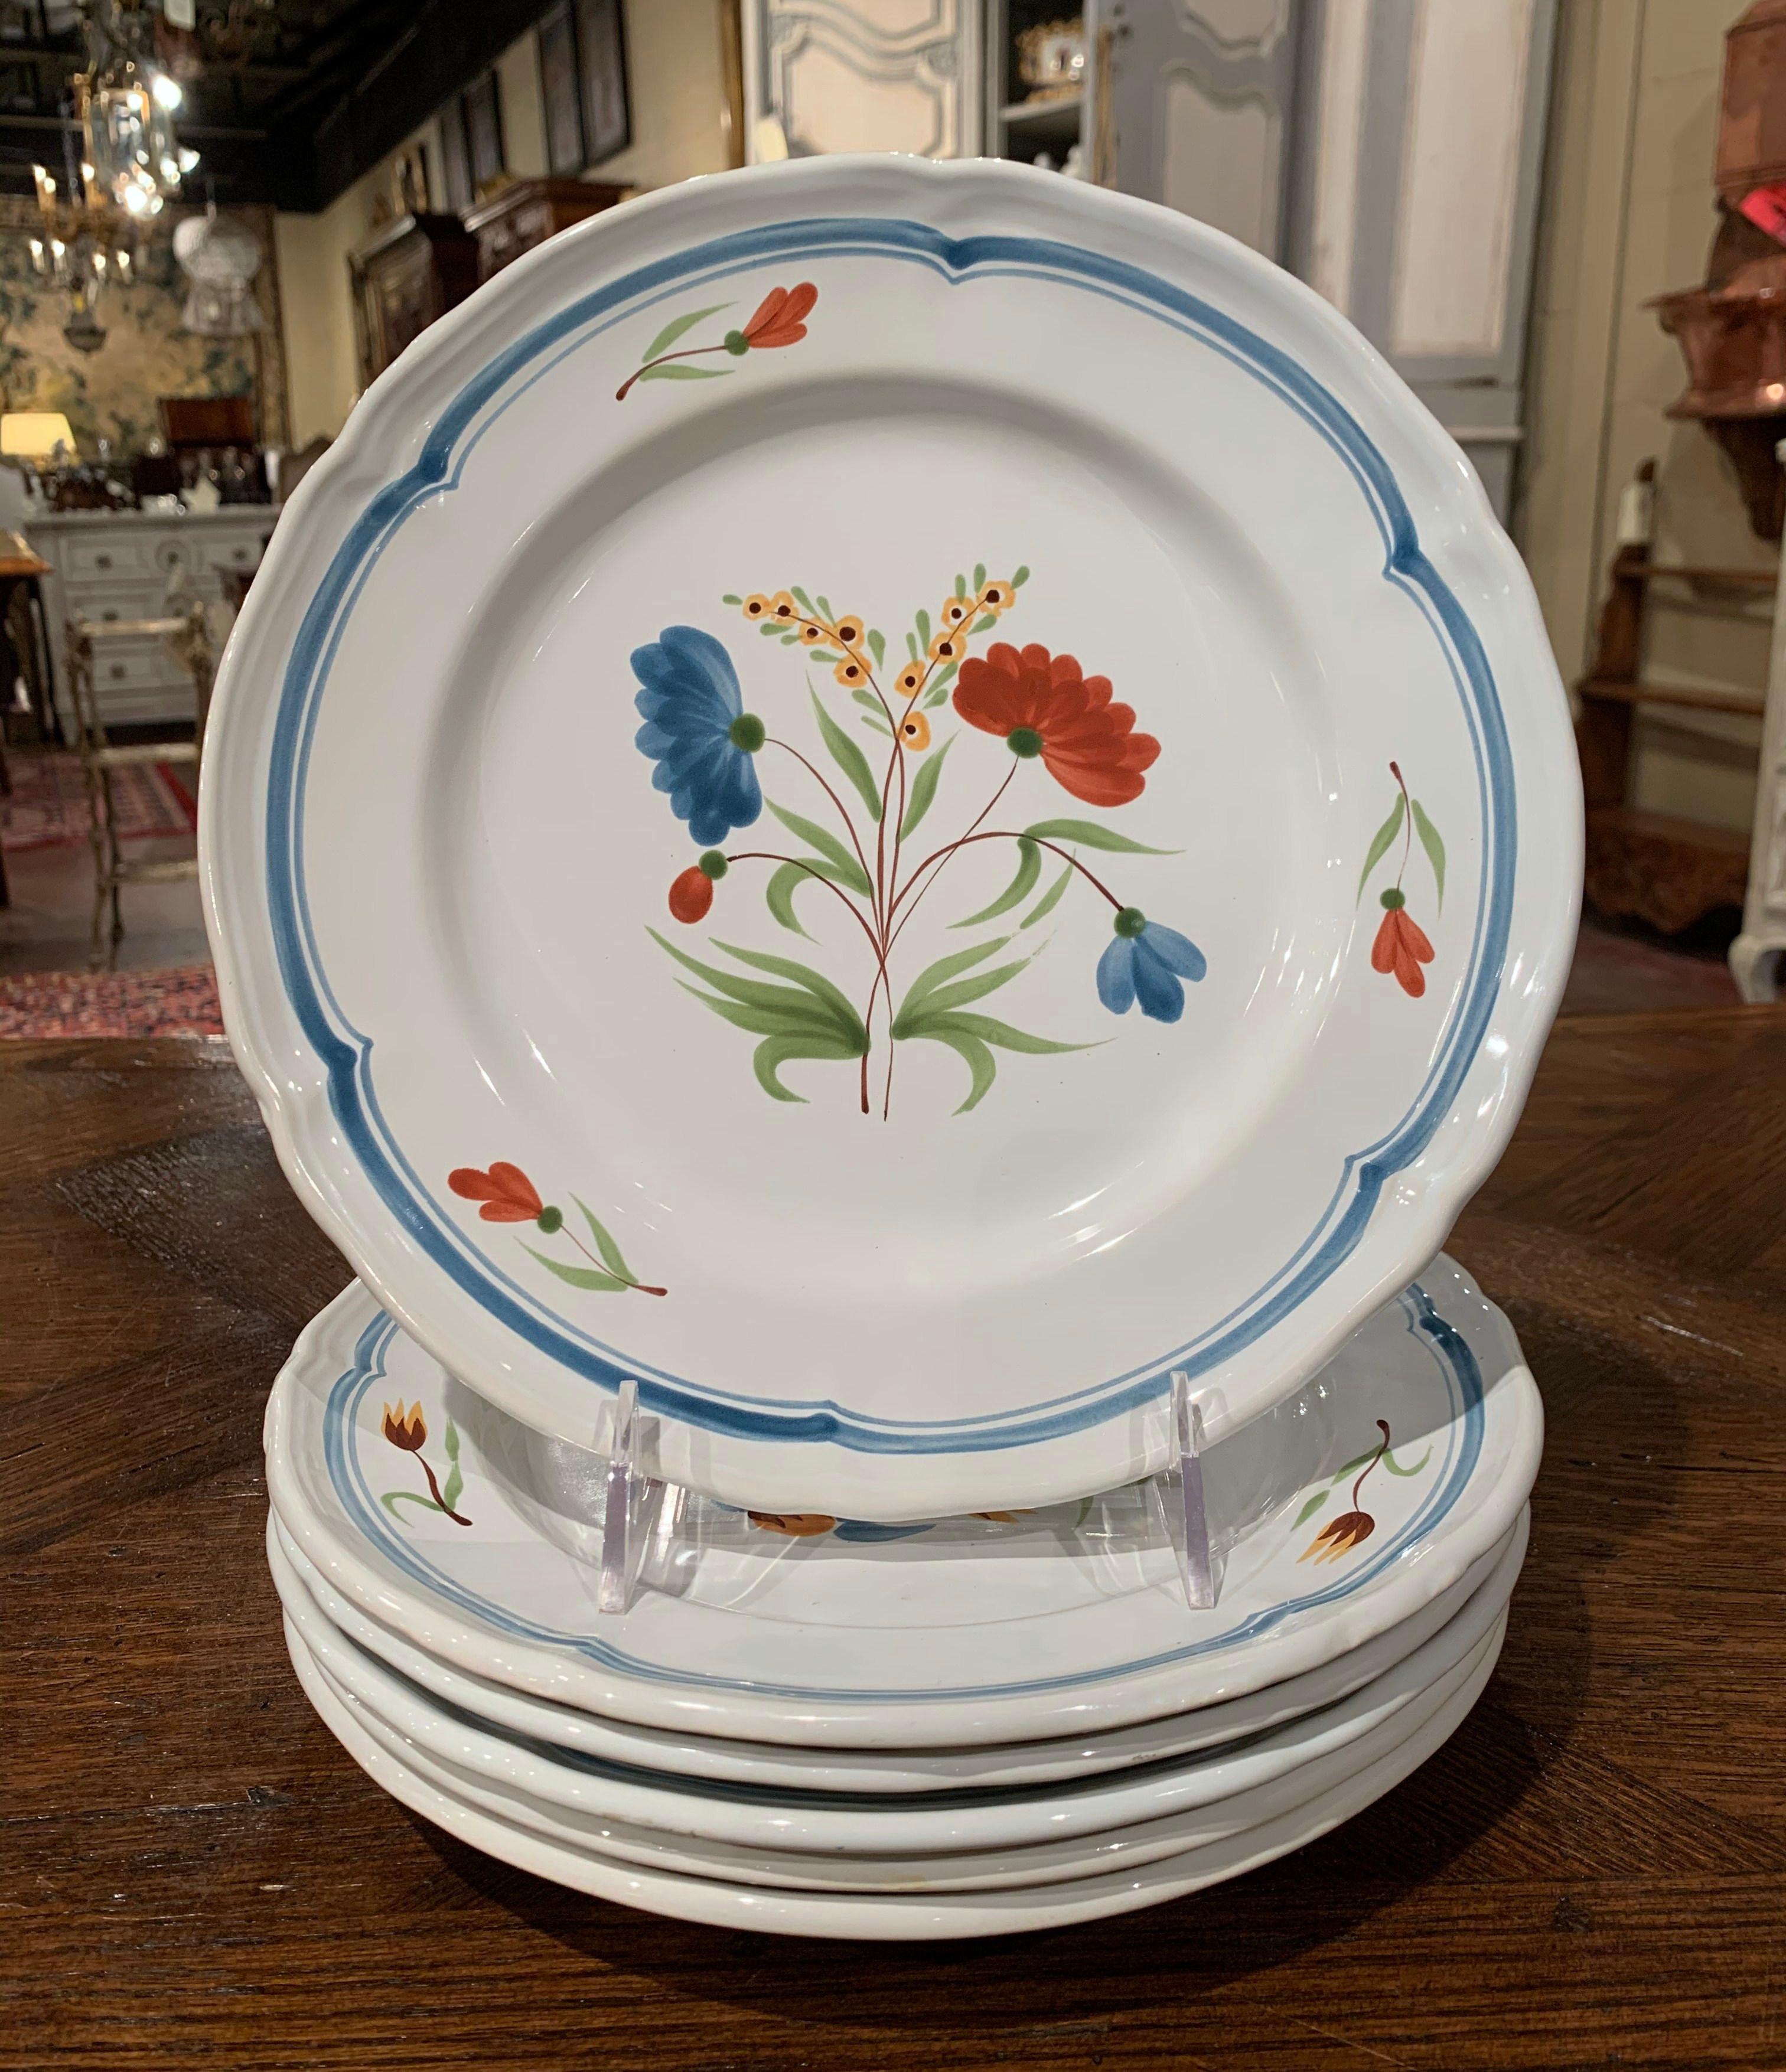 Decorate a kitchen wall or fill up a decorative hutch with this elegant set of hand painted, ceramic plates. Crafted in Pornic, France circa 2000, each colorful plate is hand painted with floral decor. The faience plates are in excellent condition